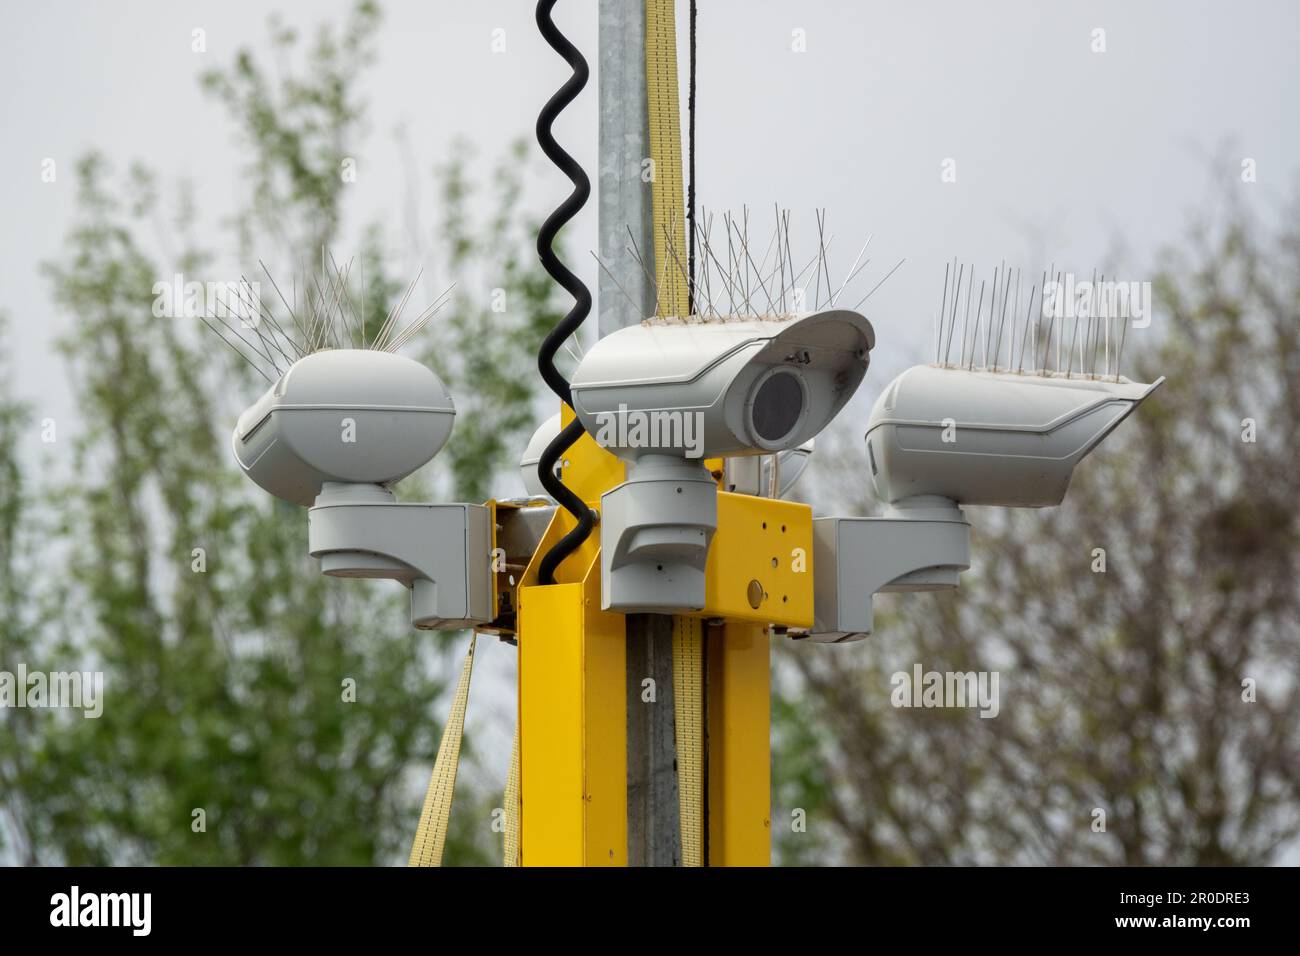 Mobile CCTV cameras looking in all directions Stock Photo